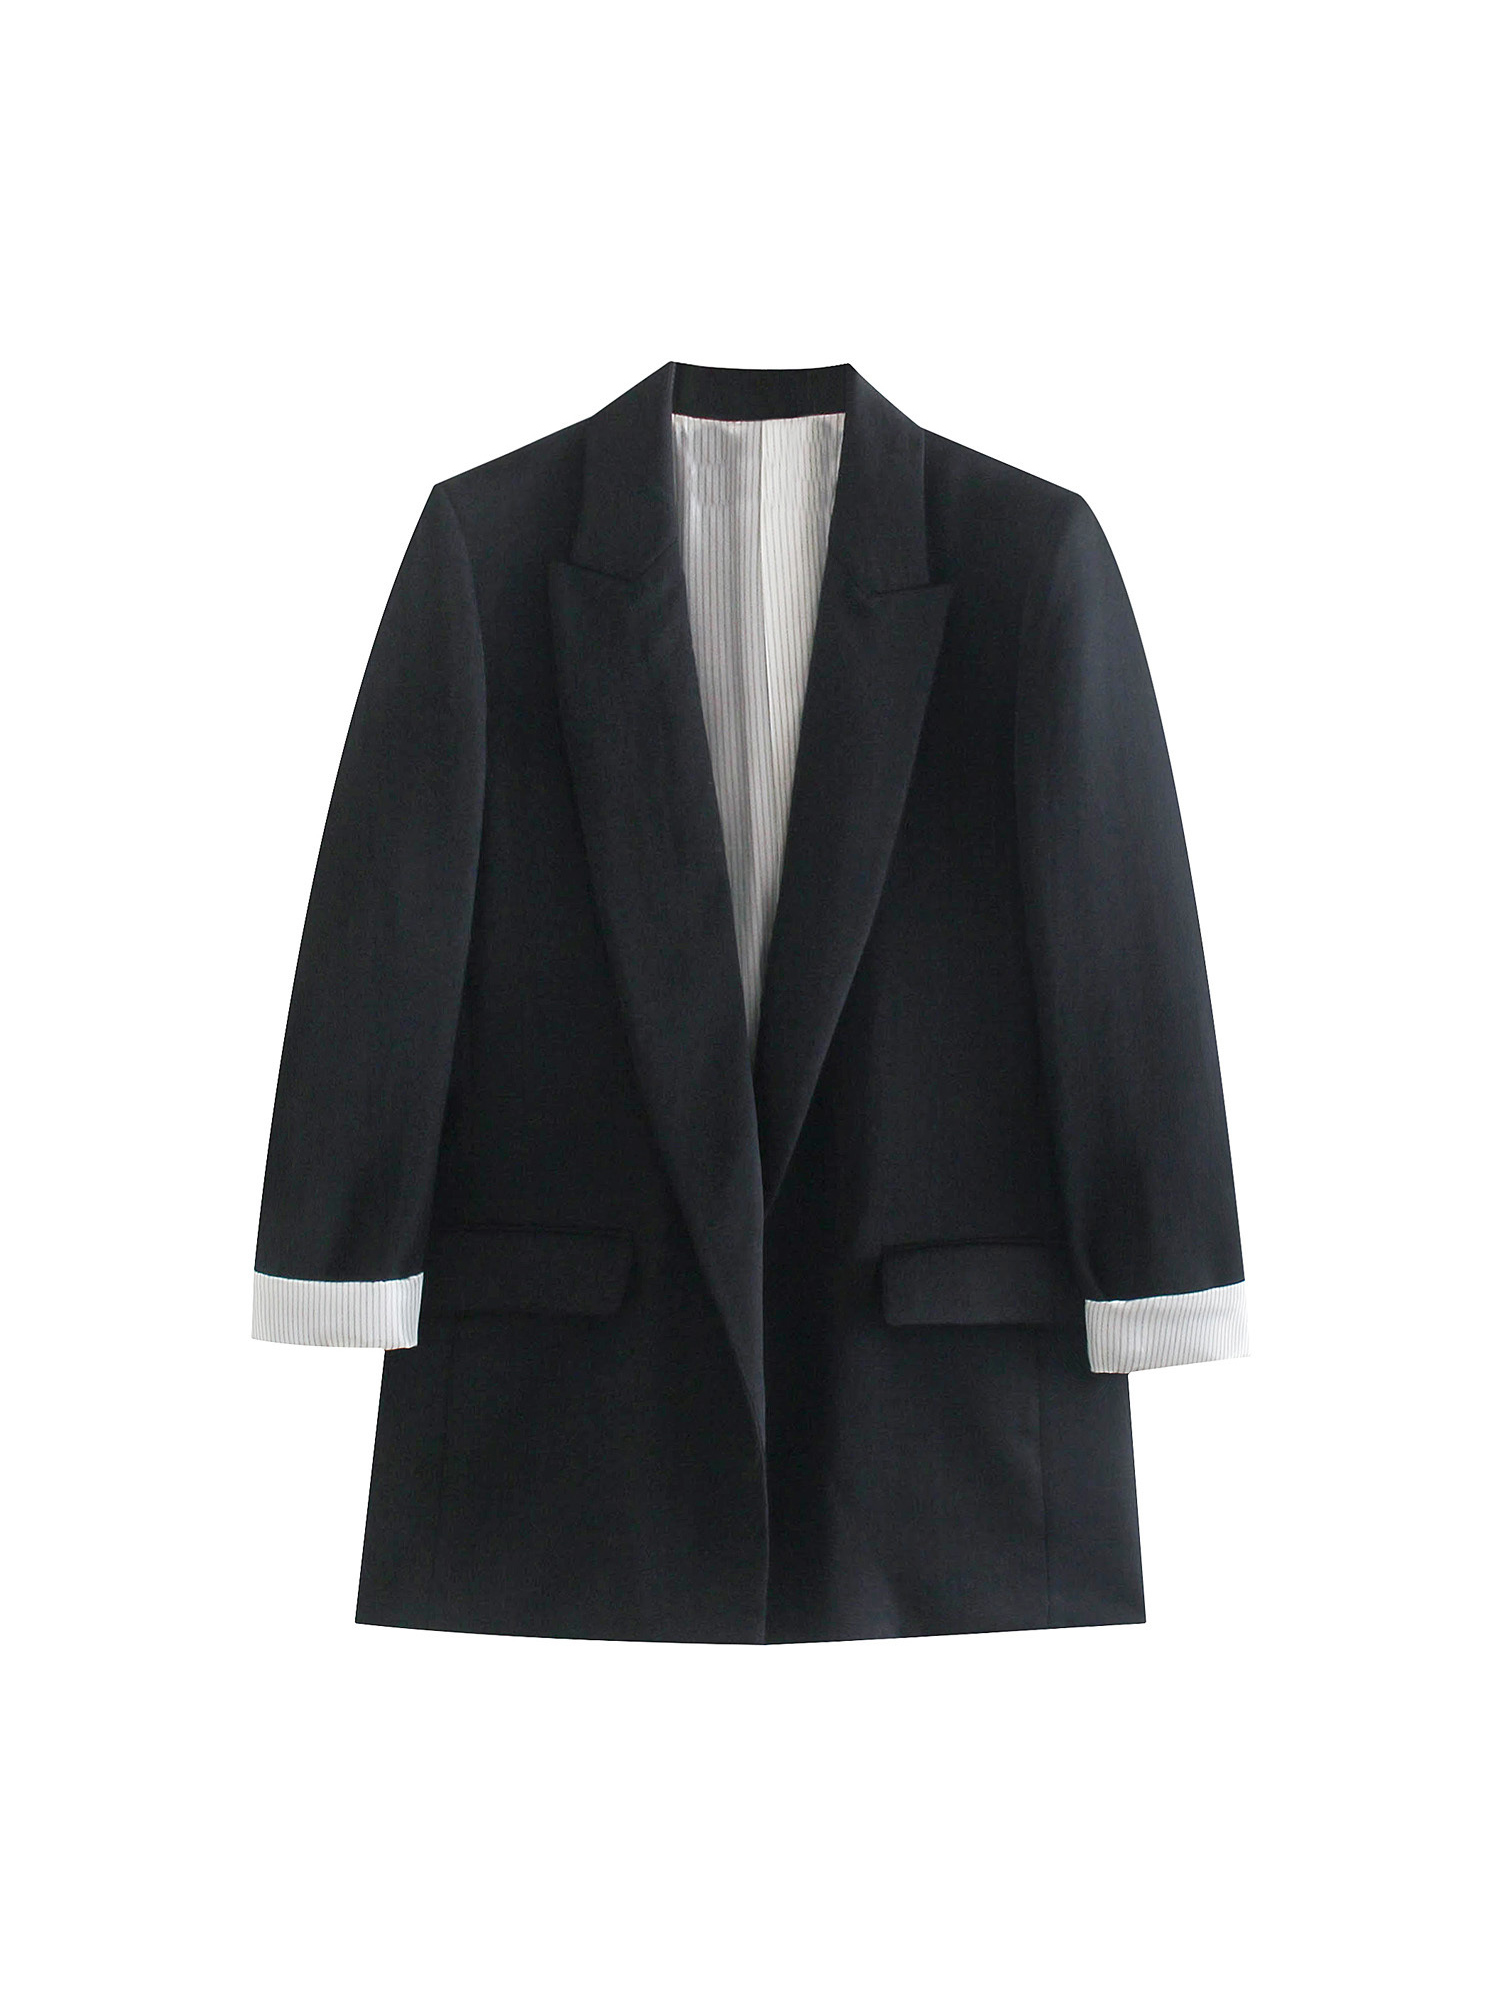 Cheap Outerwear For Woman | Wholesale Blazers, Jackets, Coats ...